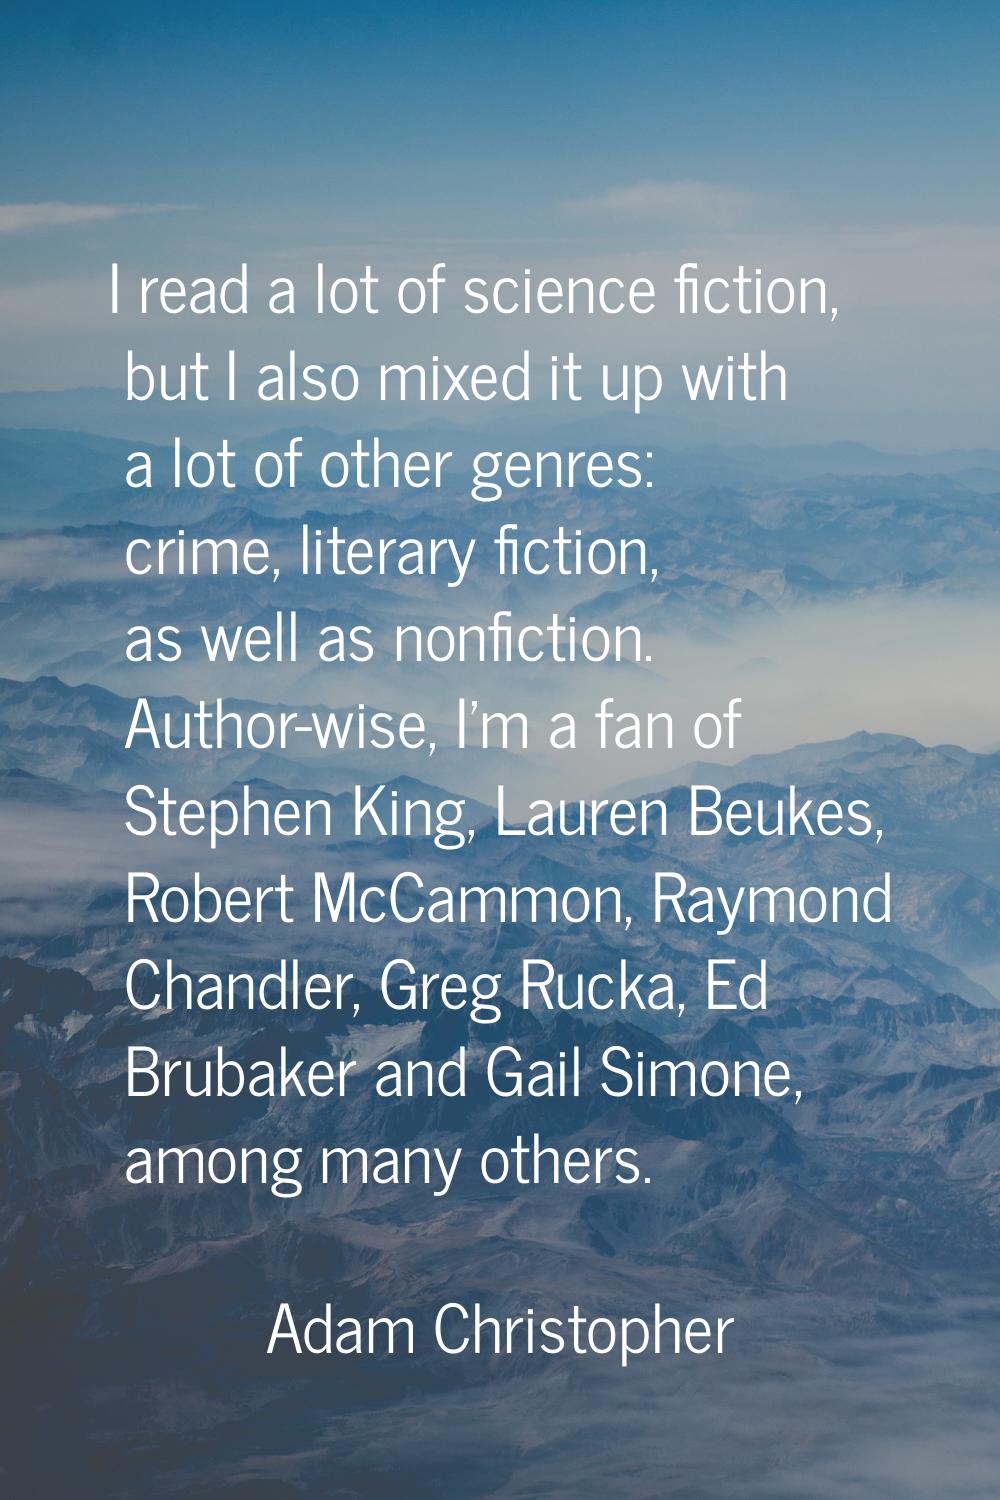 I read a lot of science fiction, but I also mixed it up with a lot of other genres: crime, literary